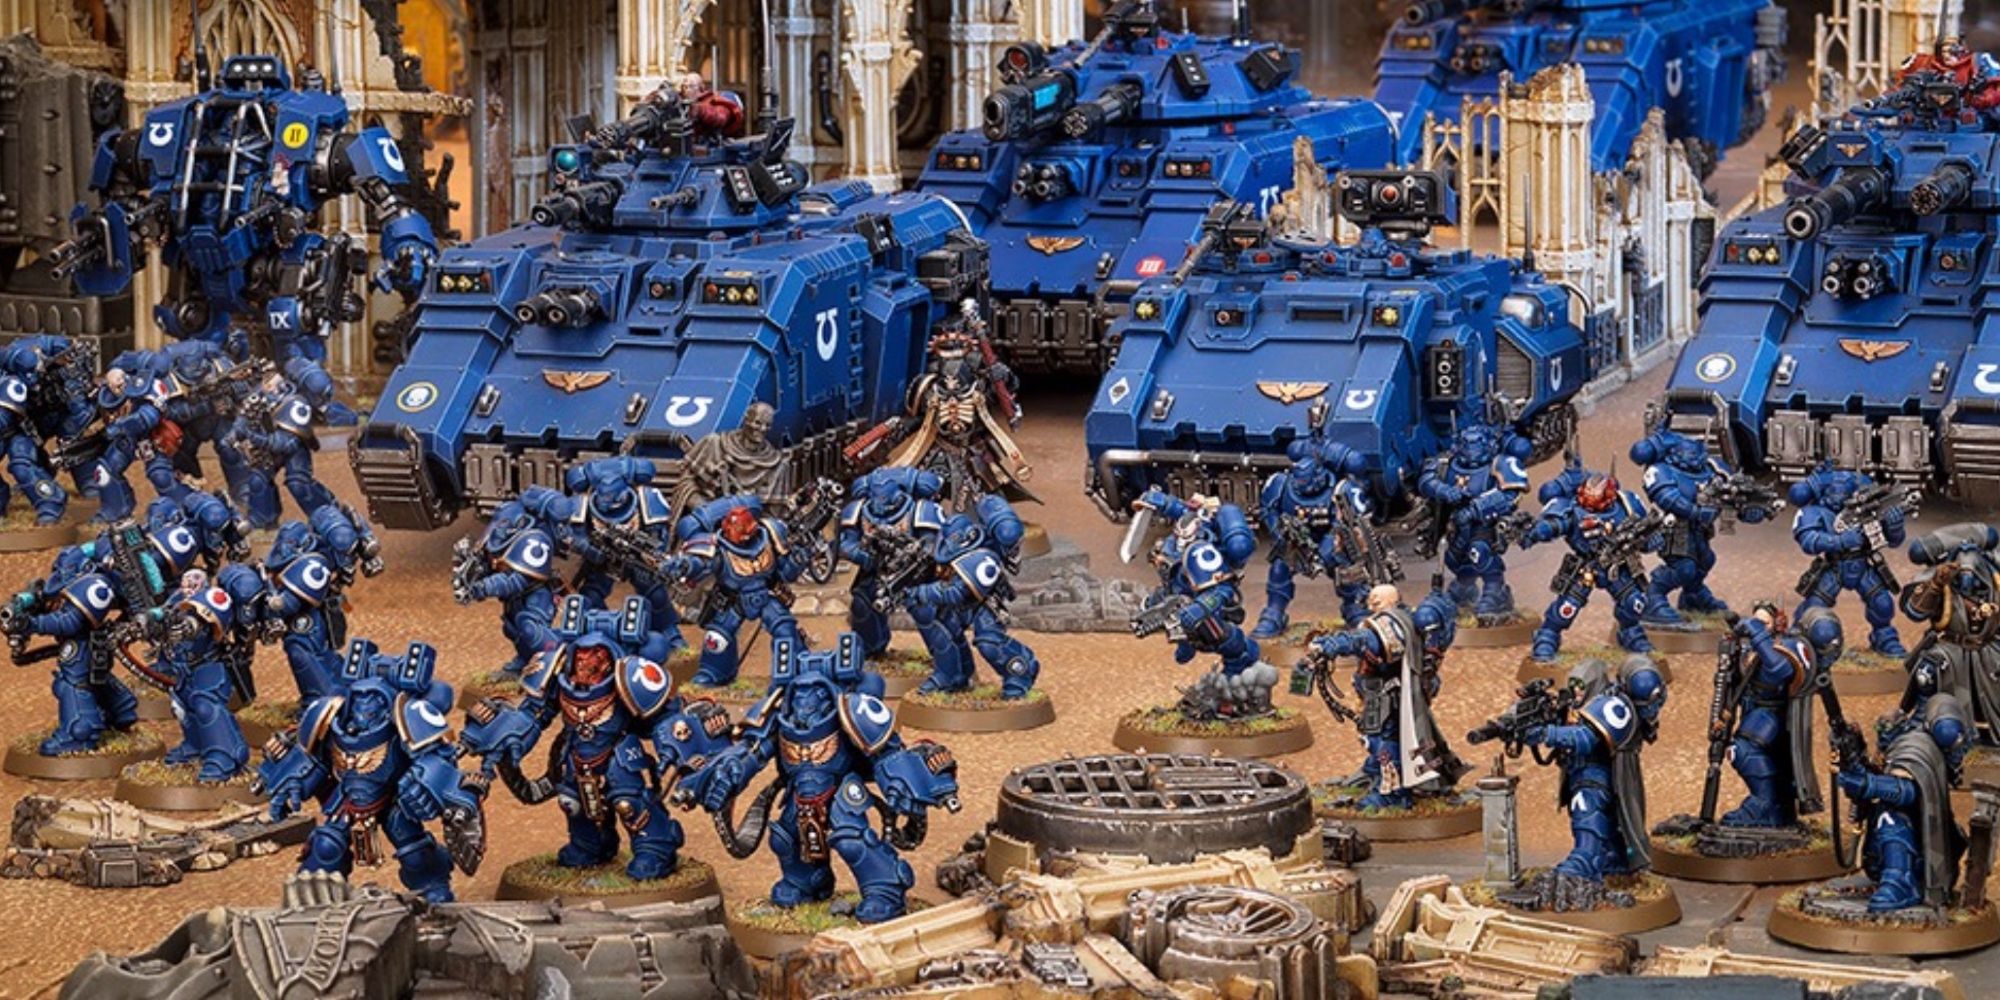 Warhammer 40k: 7 Reasons To Play Space Marines an army of Ultramarines models from Games Workshop